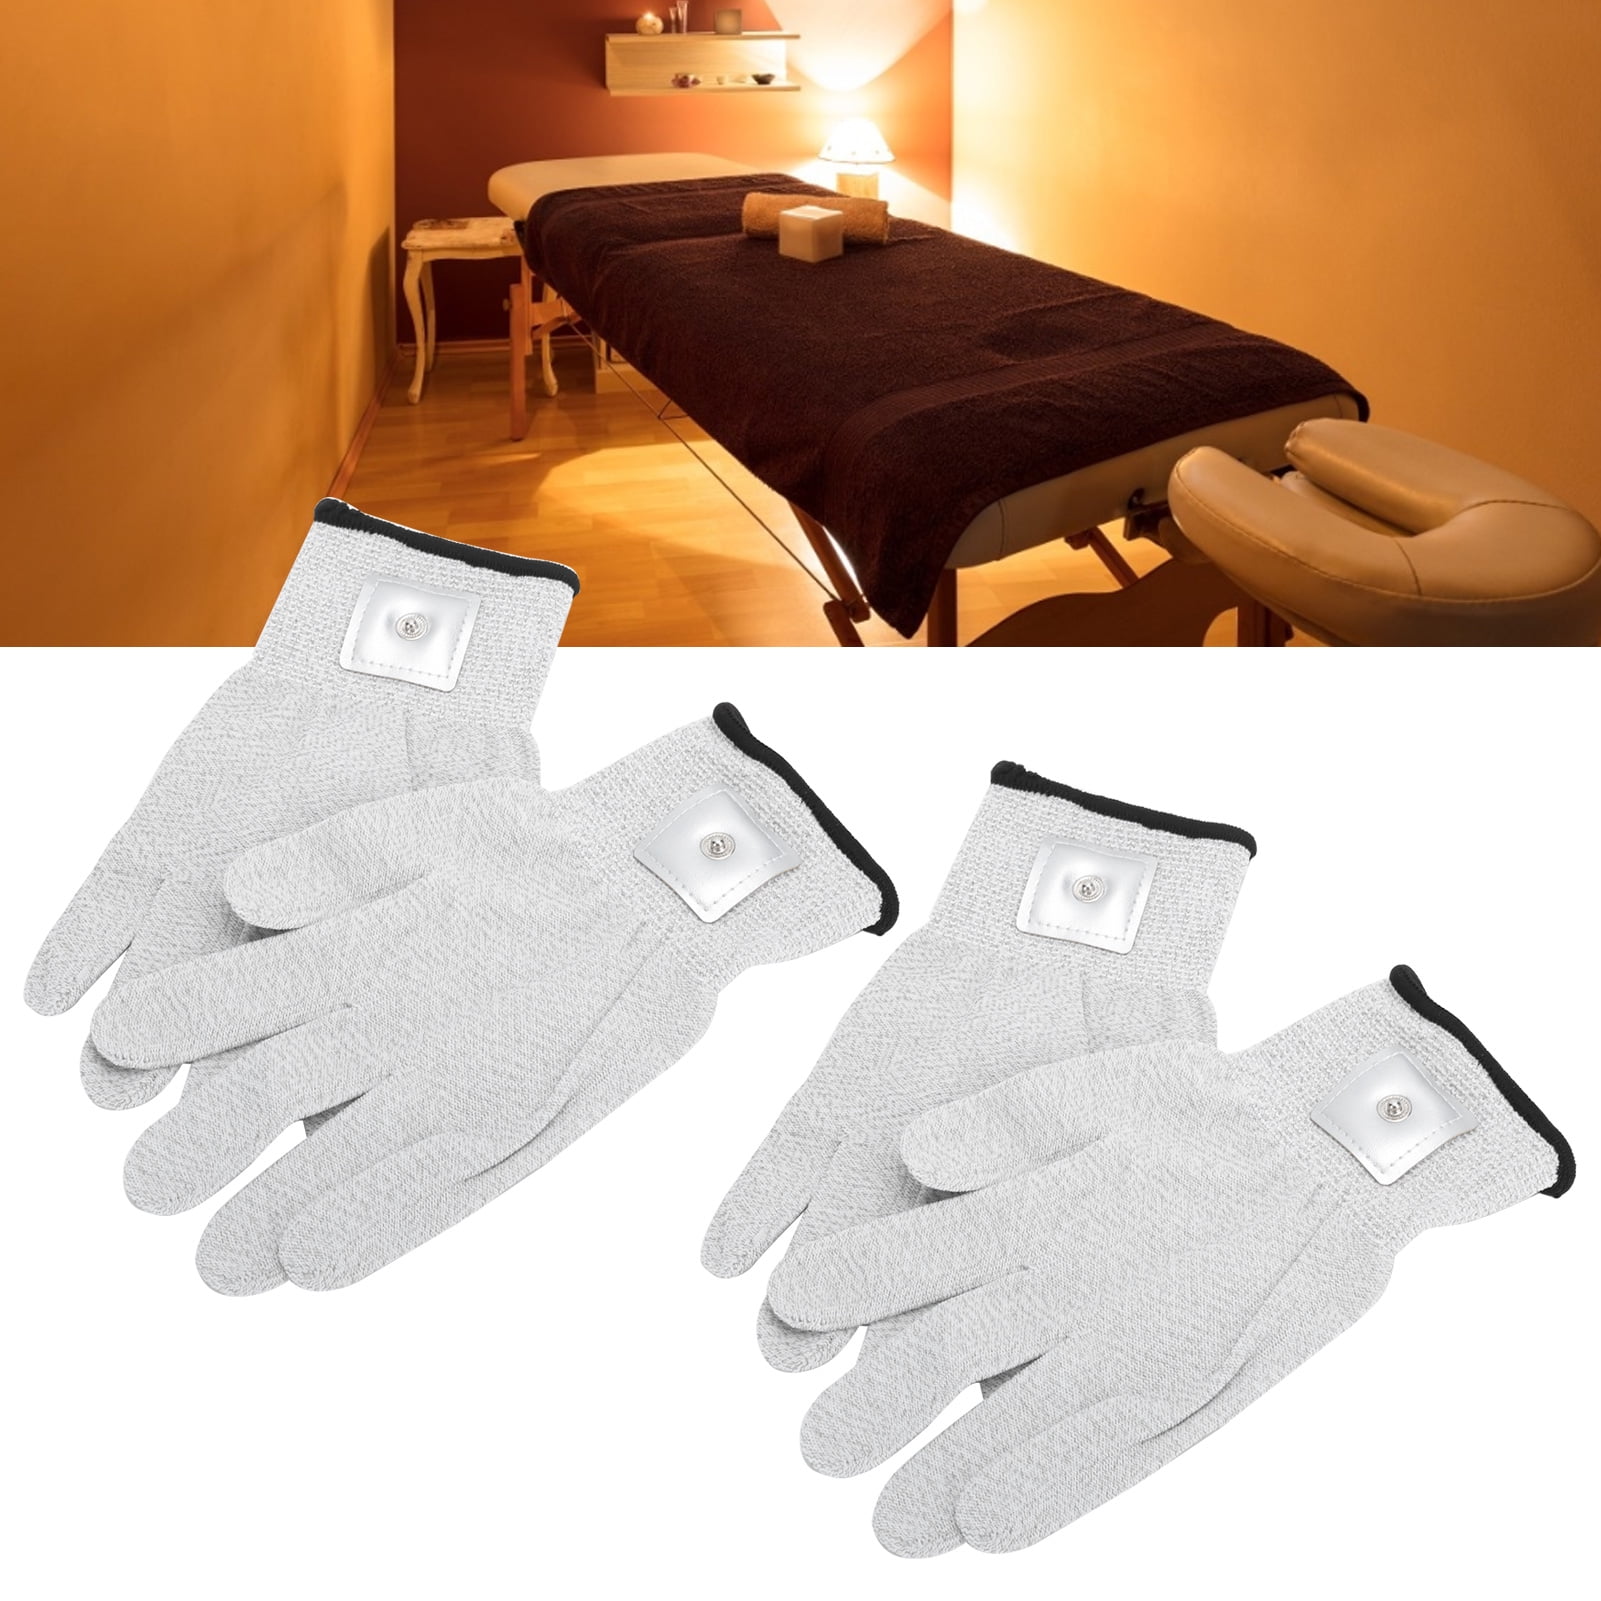 ChoiceMMed TENS Device with Electrode Gloves Pair – Conductive